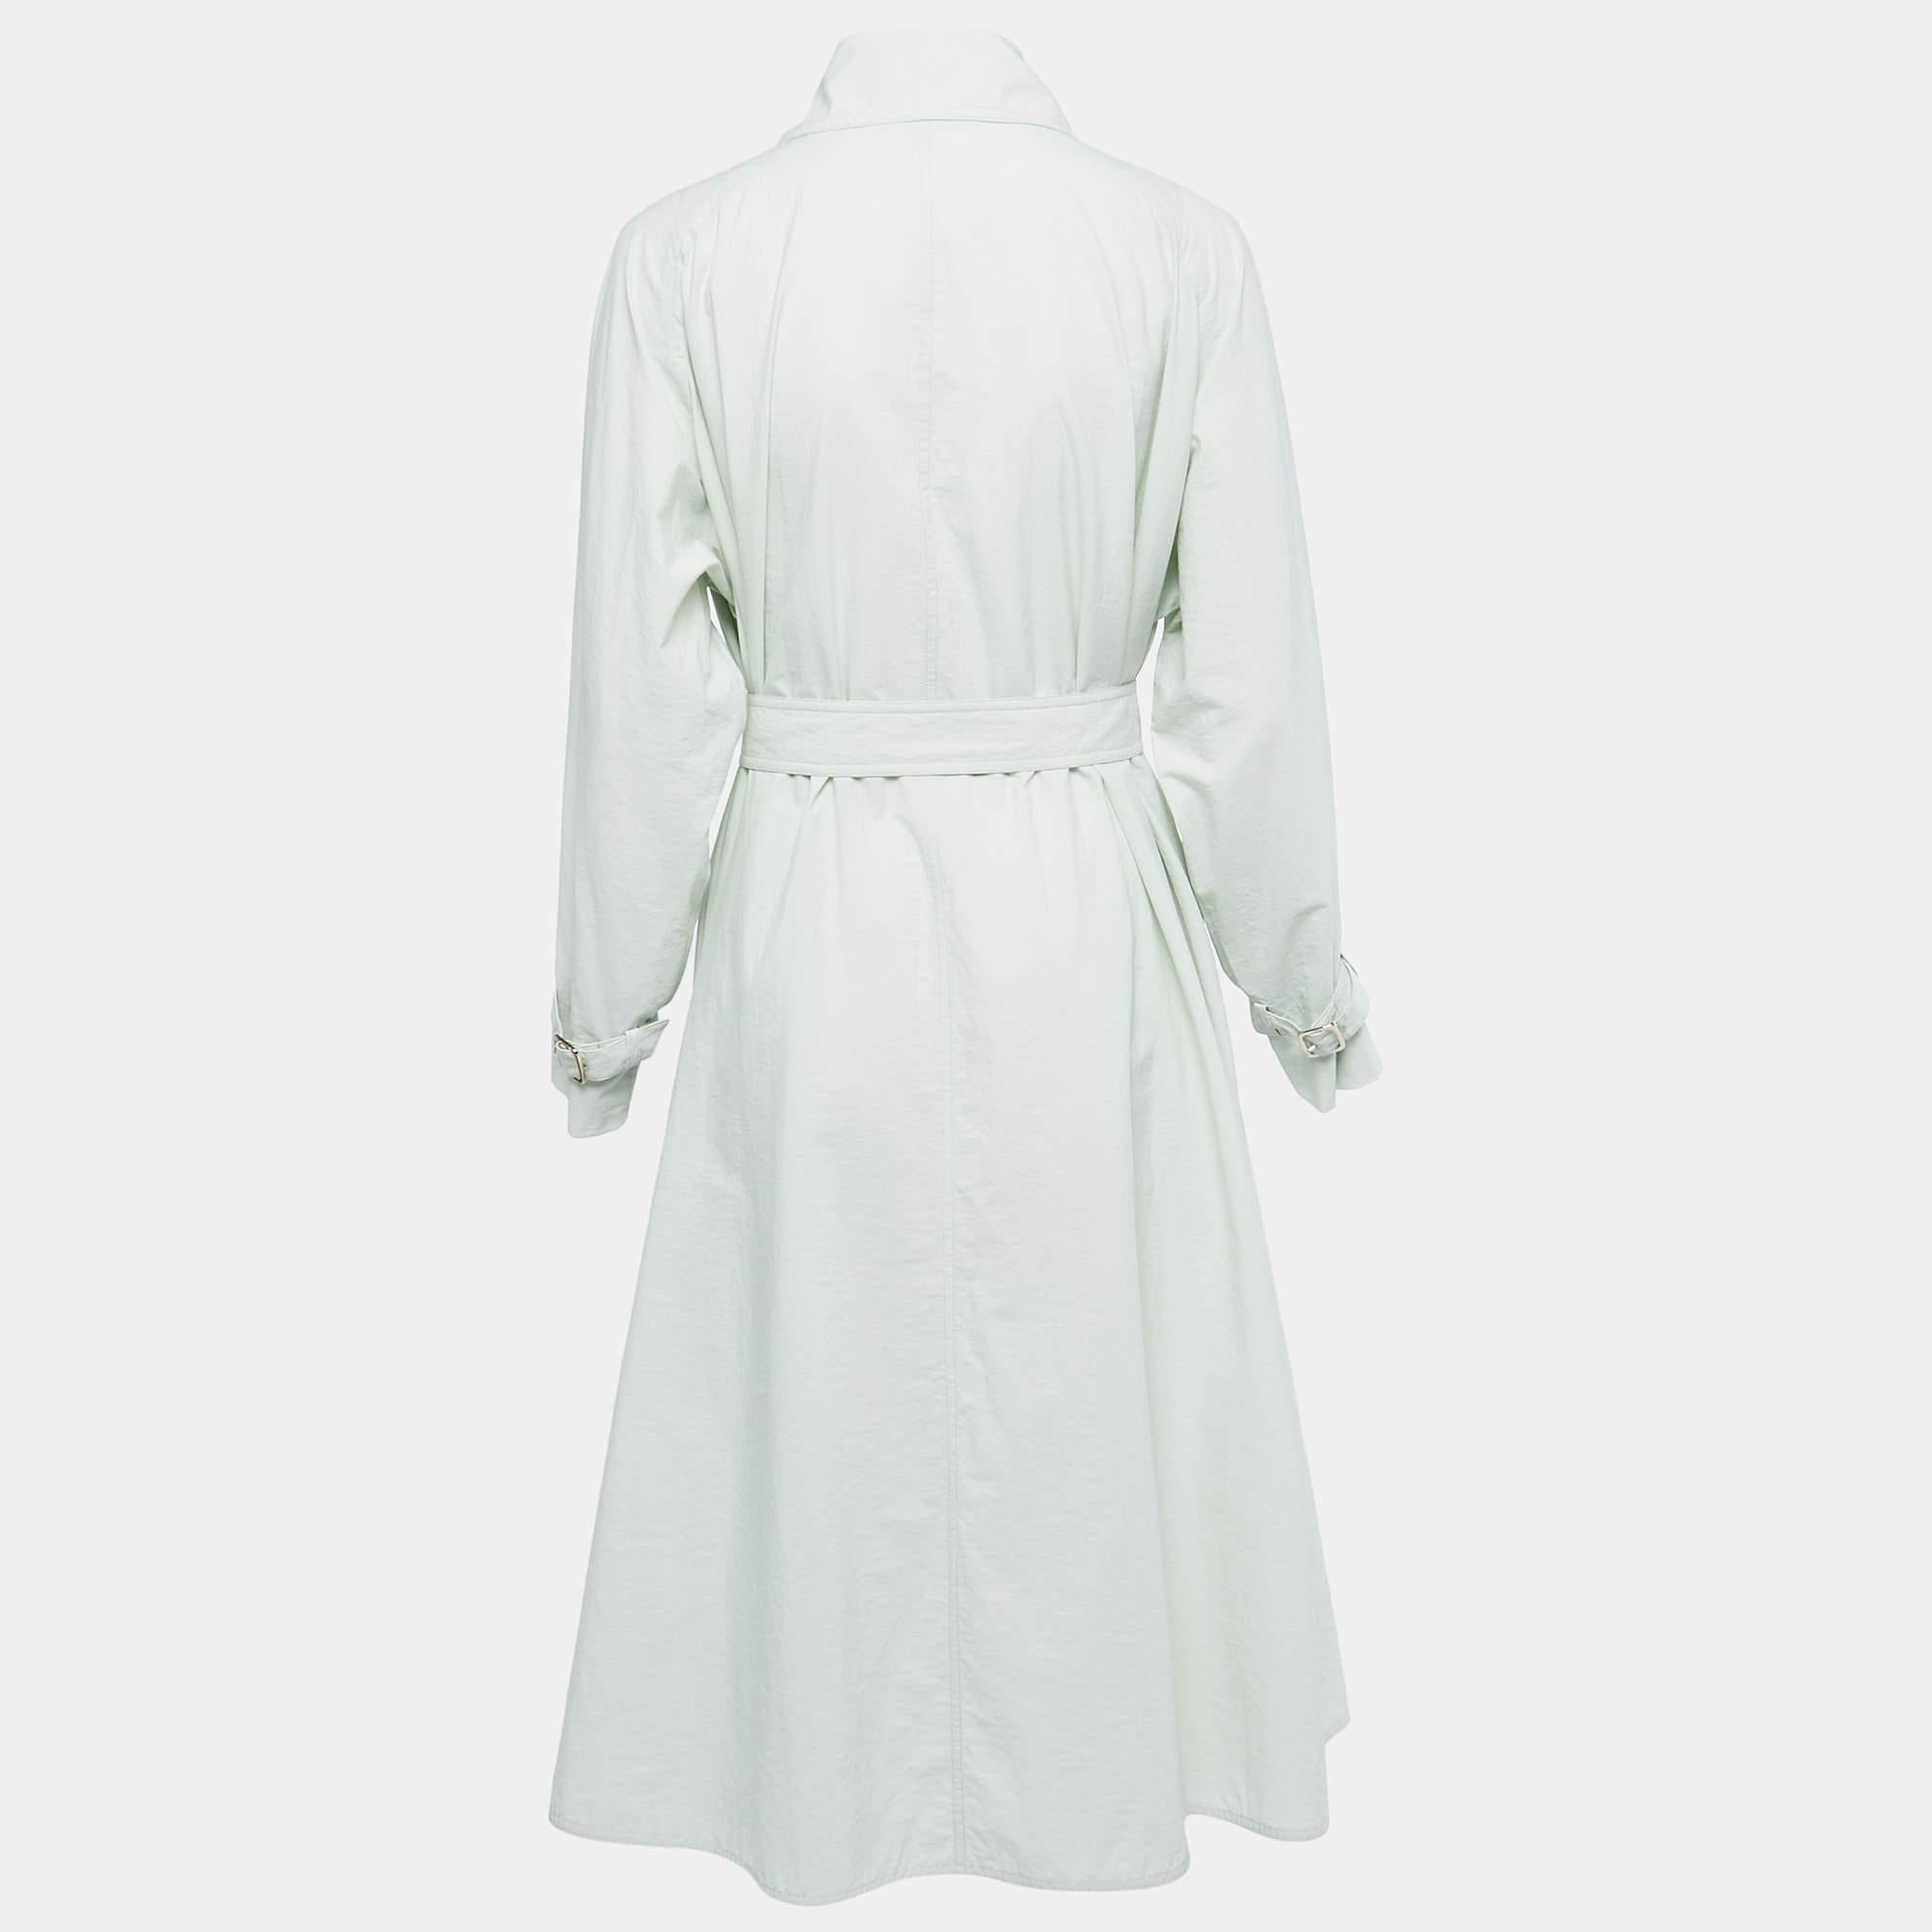 The Max Mara trench coat is a stylish and sophisticated outerwear piece. Crafted from high-quality cotton, it features a double-breasted design with a belted waist, adding a flattering silhouette. The fresh mint green color adds a touch of elegance